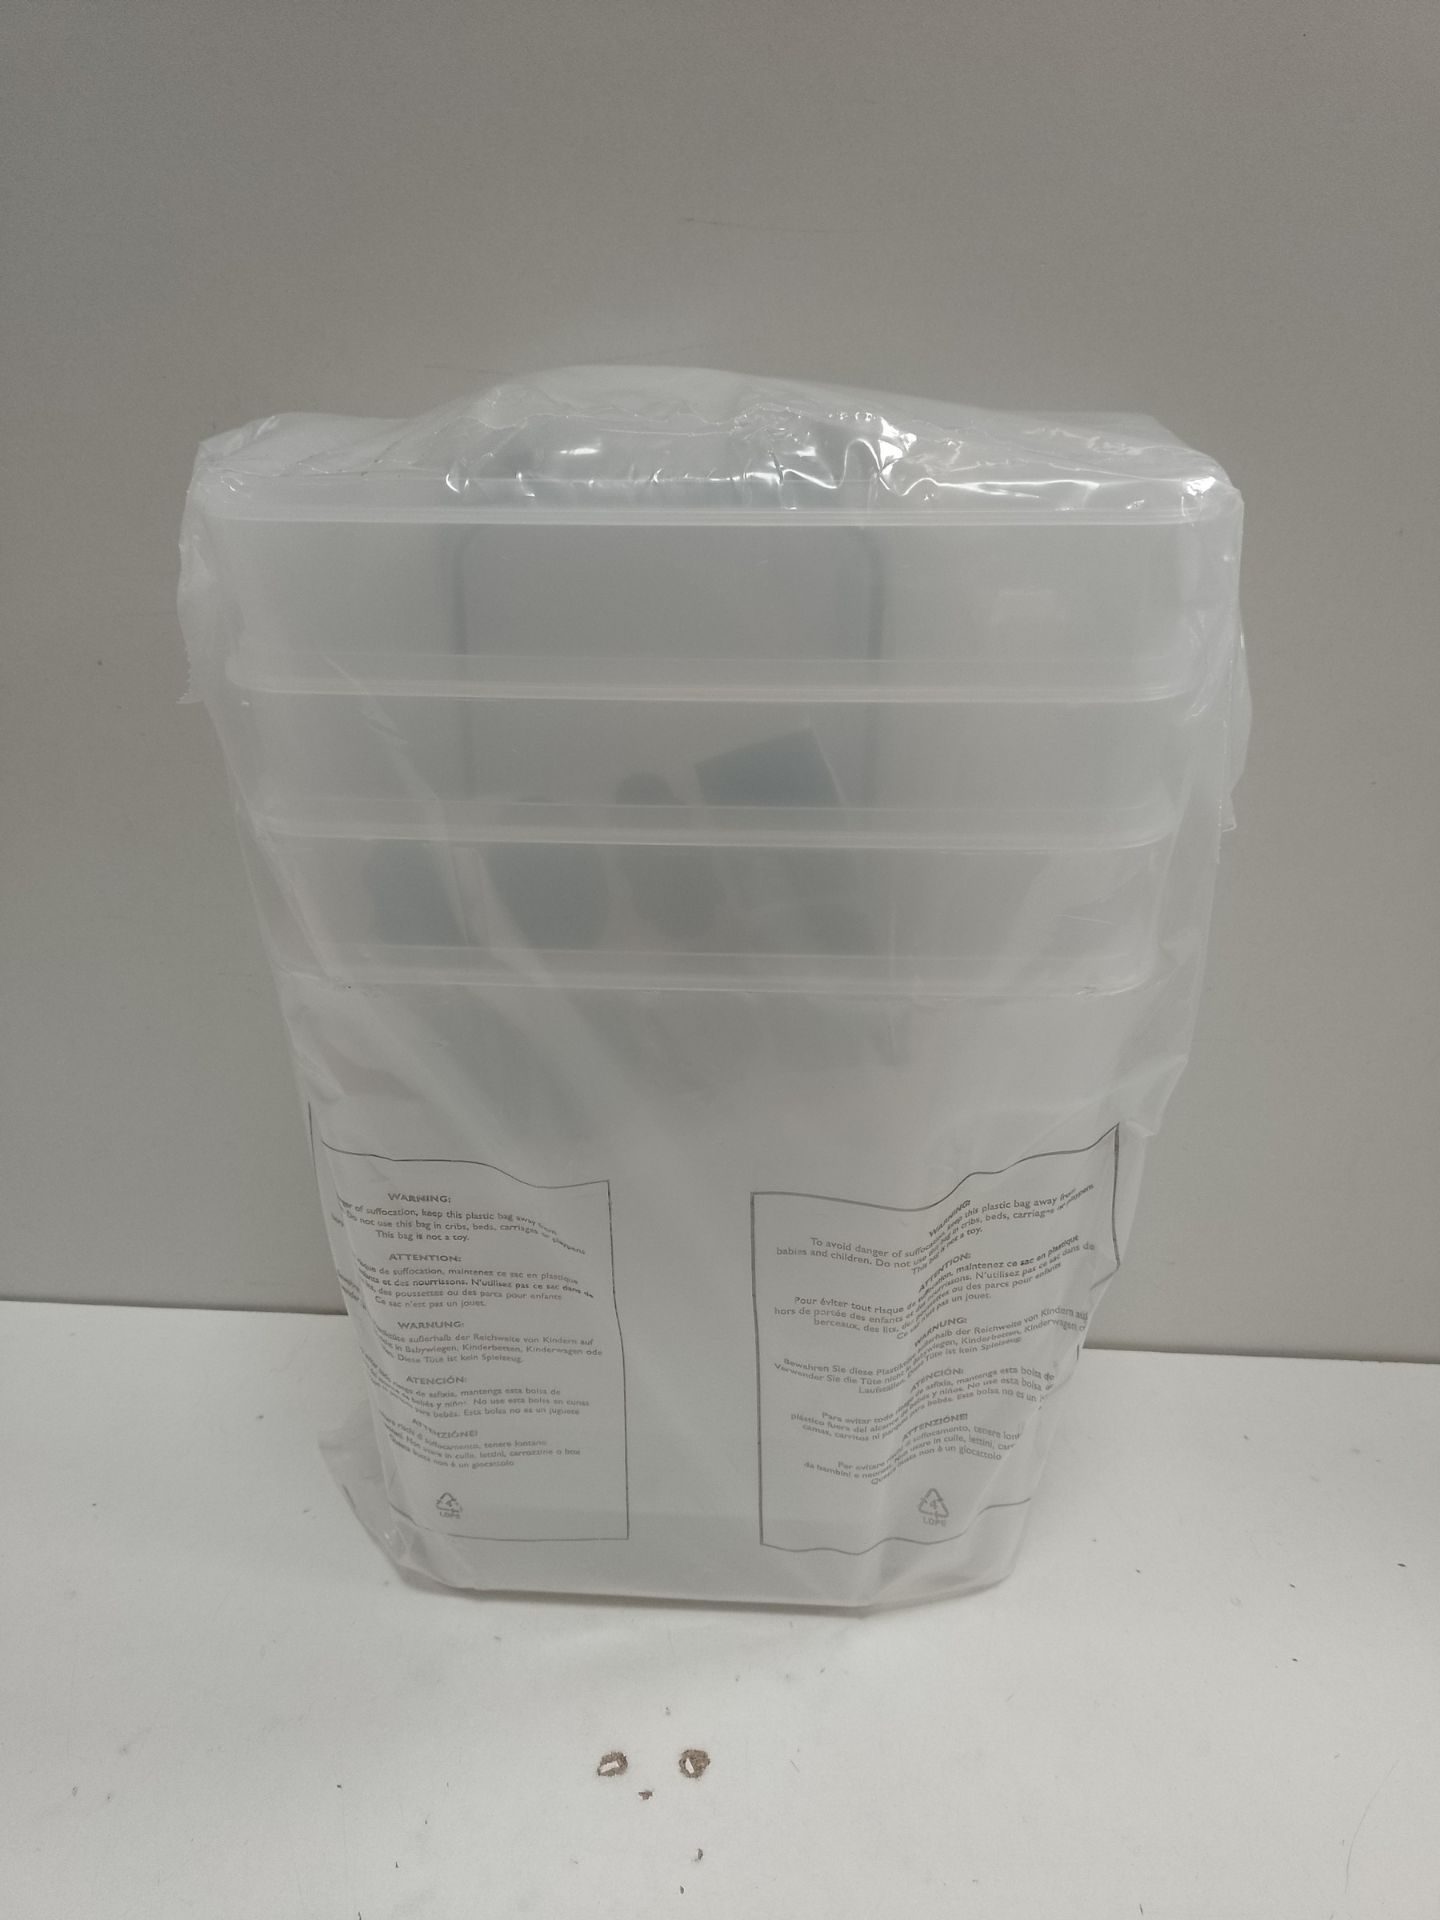 RRP £38.80 BRAND NEW STOCK Lifewit 5.5L Cereal Storage Containers Dispenser with Flip-Top Lids - Image 2 of 2